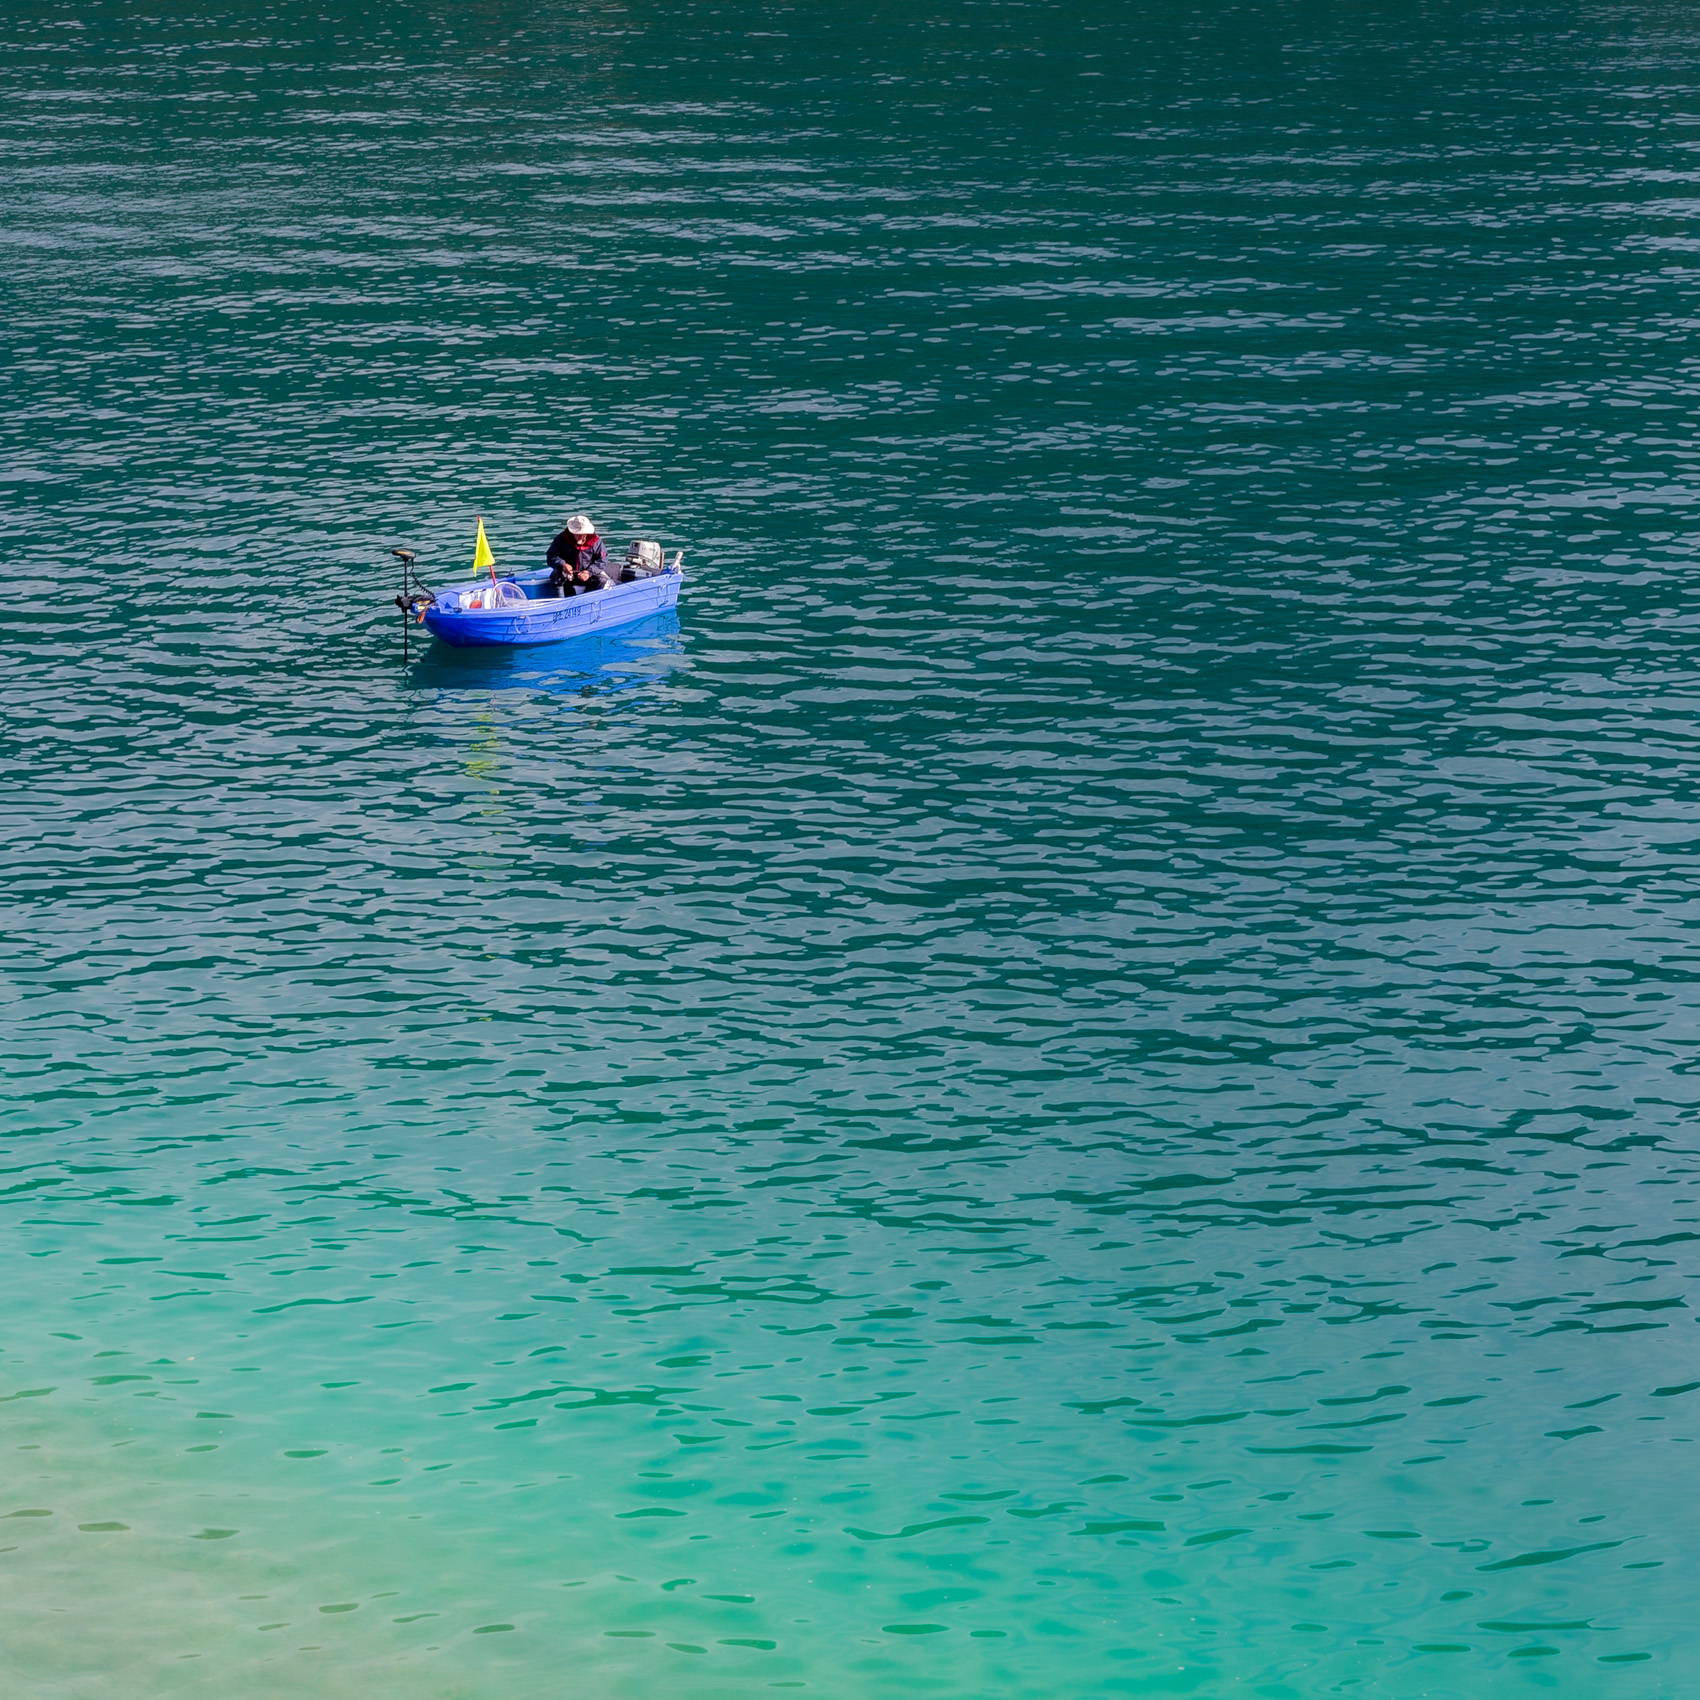 Pêcheur sur le lac d'Annecy - Canon EOS 5D Mark III - EF 50 mm f/1,4 USM - ISO 100 - f/11 - 1/100 s